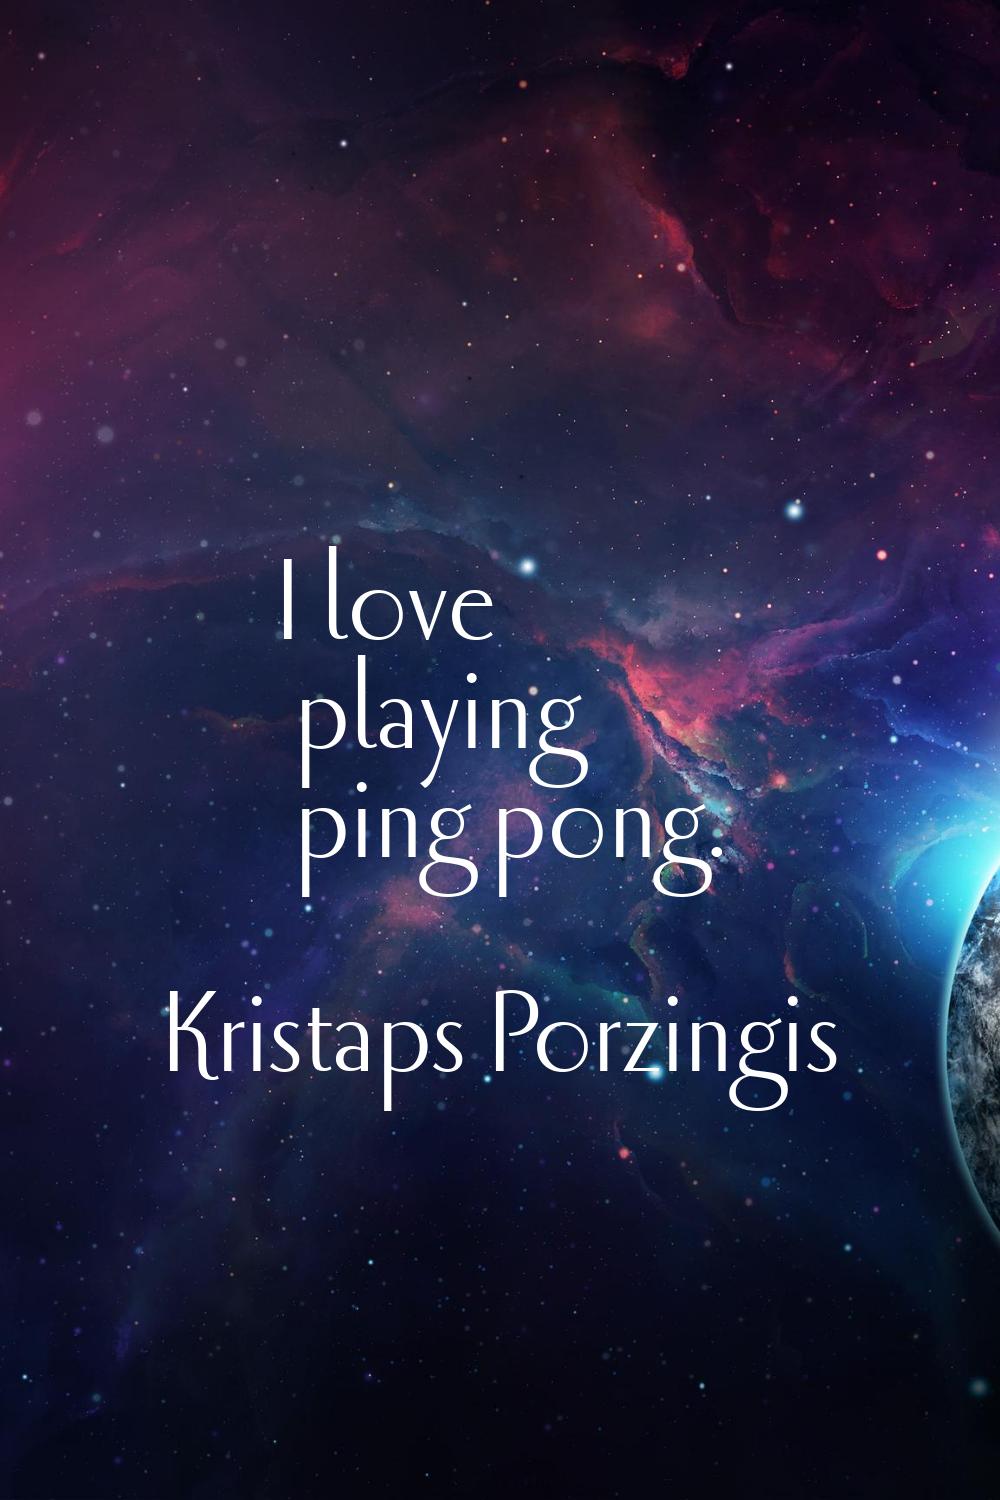 I love playing ping pong.